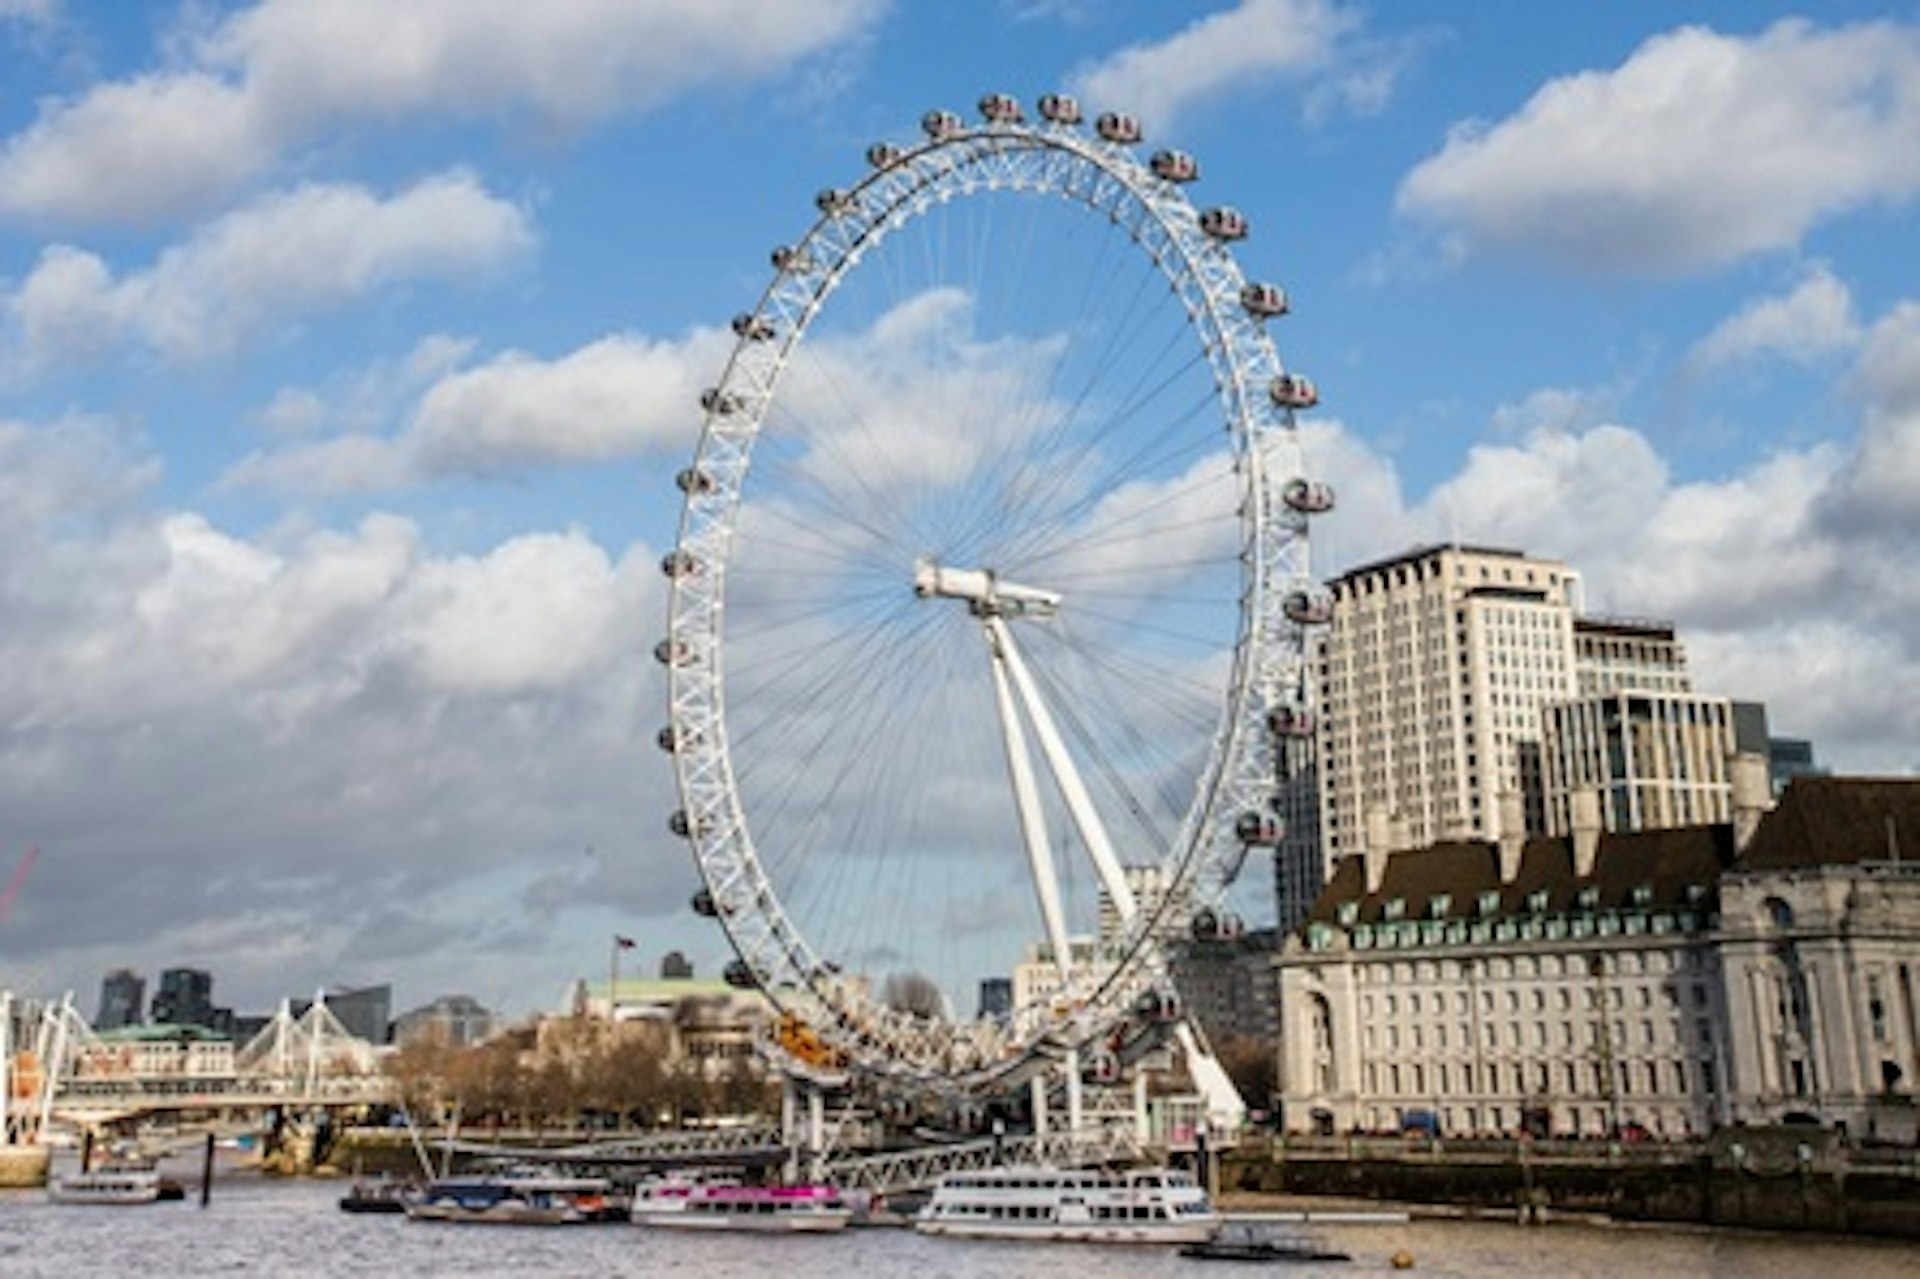 Visit to Lastminute.com London Eye with London Eye River Cruise - Two Adults and Two Children 3